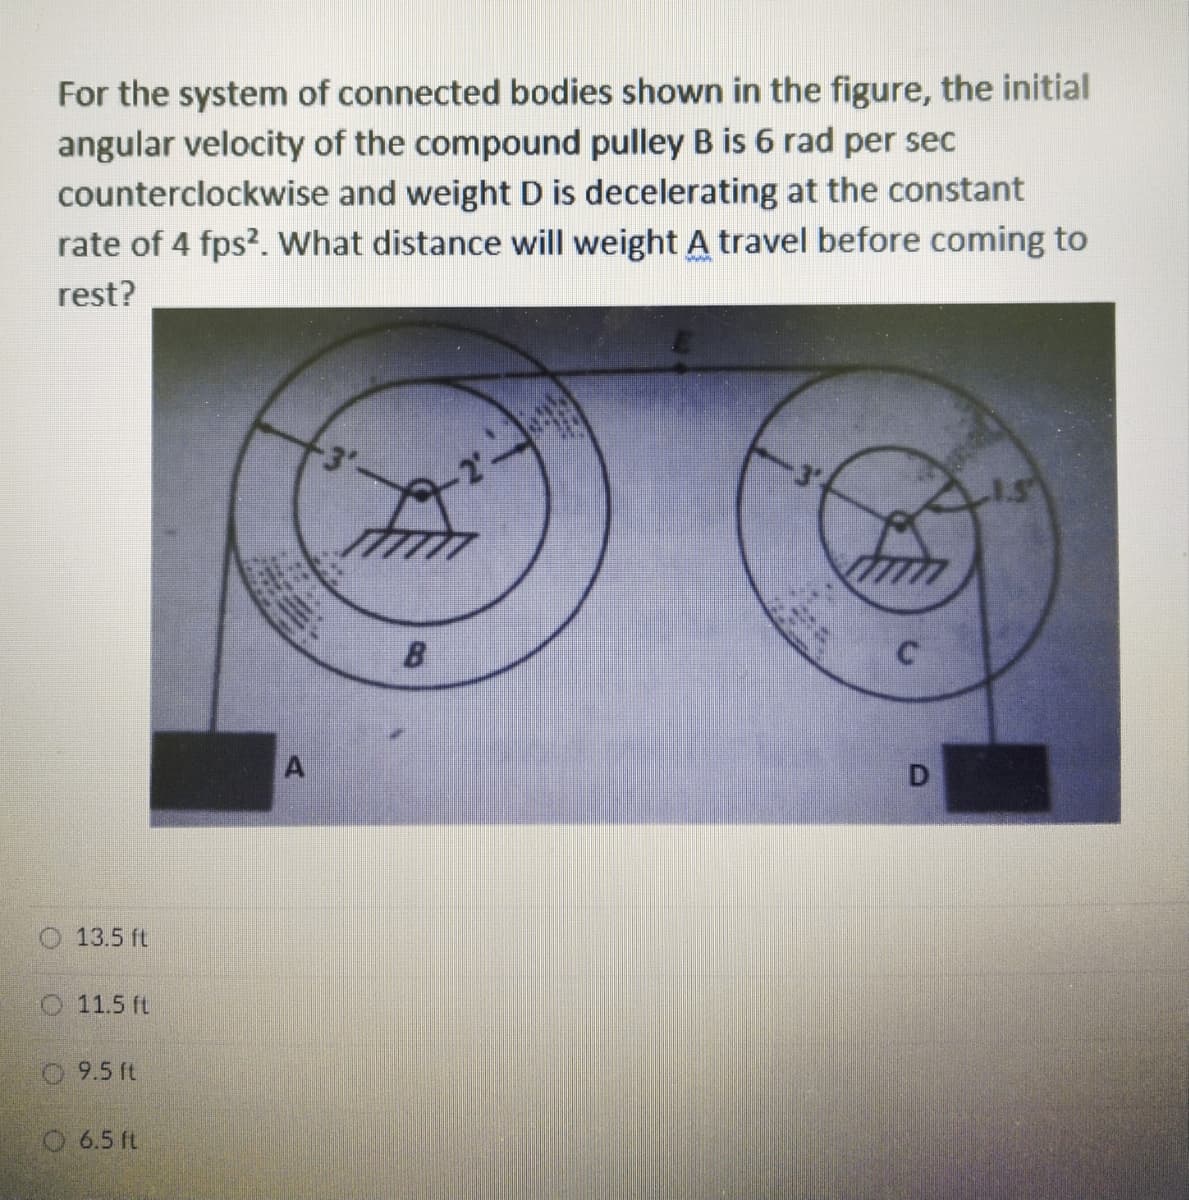 For the system of connected bodies shown in the figure, the initial
angular velocity of the compound pulley B is 6 rad per sec
counterclockwise and weight D is decelerating at the constant
rate of 4 fps?. What distance will weight A travel before coming to
rest?
-3'-
B
13.5 ft
O11.5 ft
9.5 ft
O 6.5 ft
D.
